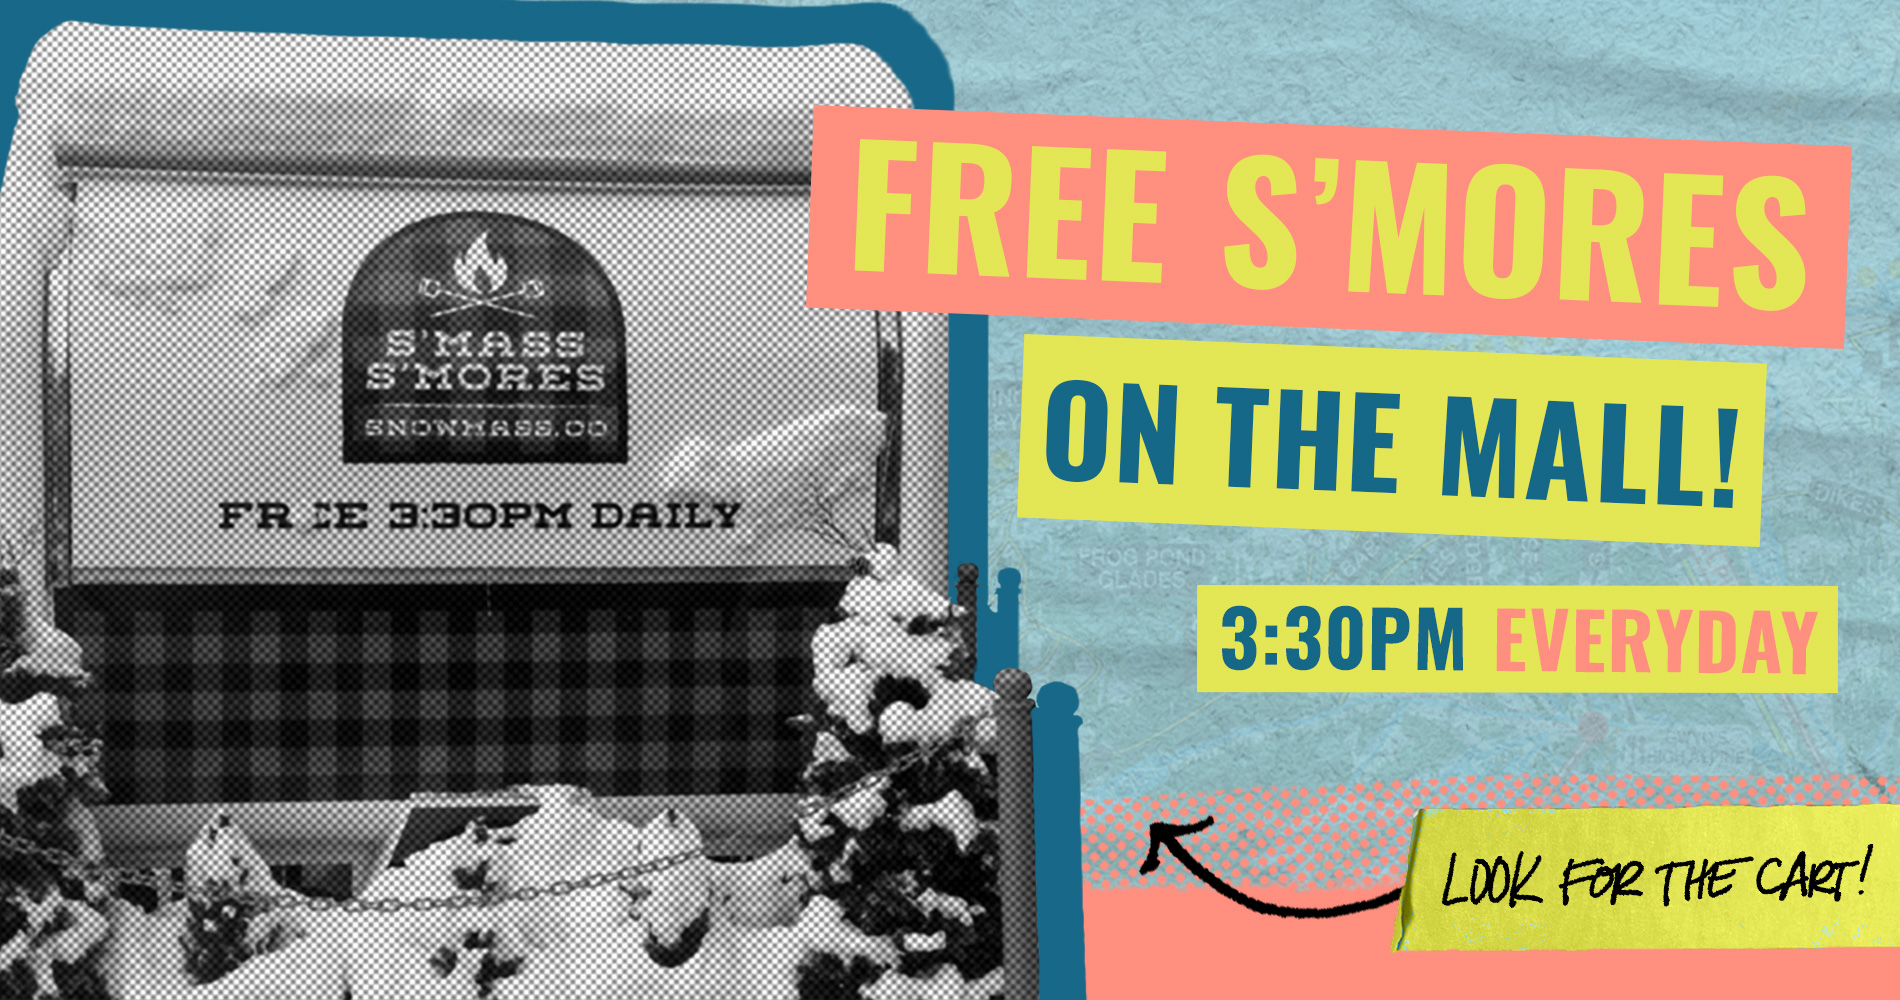 Free smores on the mall - slider